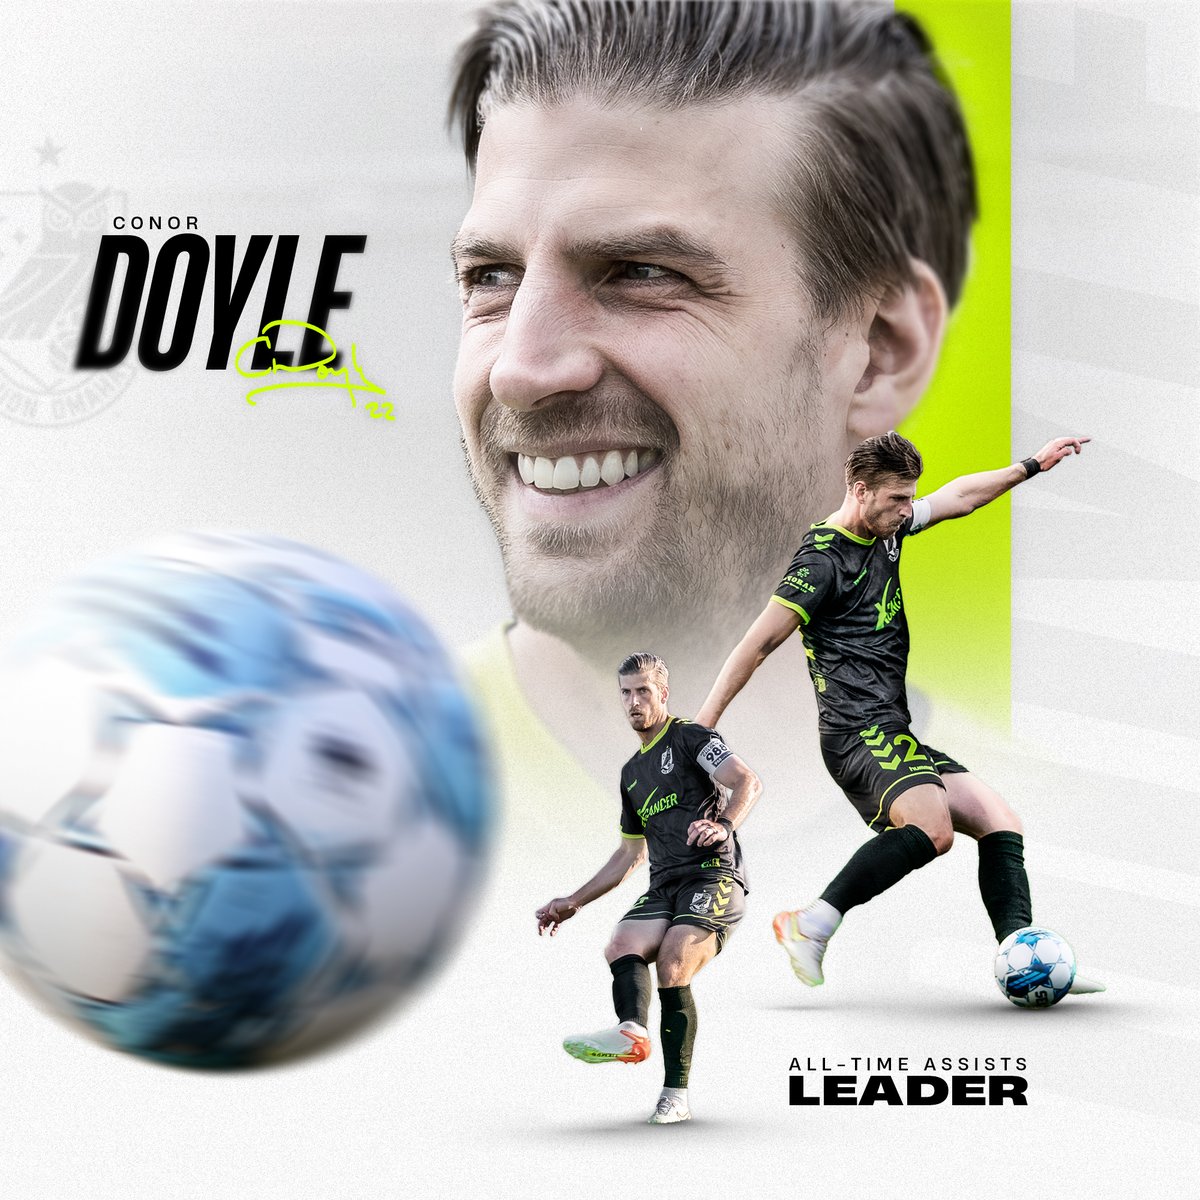 👟 Forever etched into our history.

Help us congratulate @ConorDoyle14 on becoming the club's all-time assists leader after setting up last night's opener!

#OneMeansAll